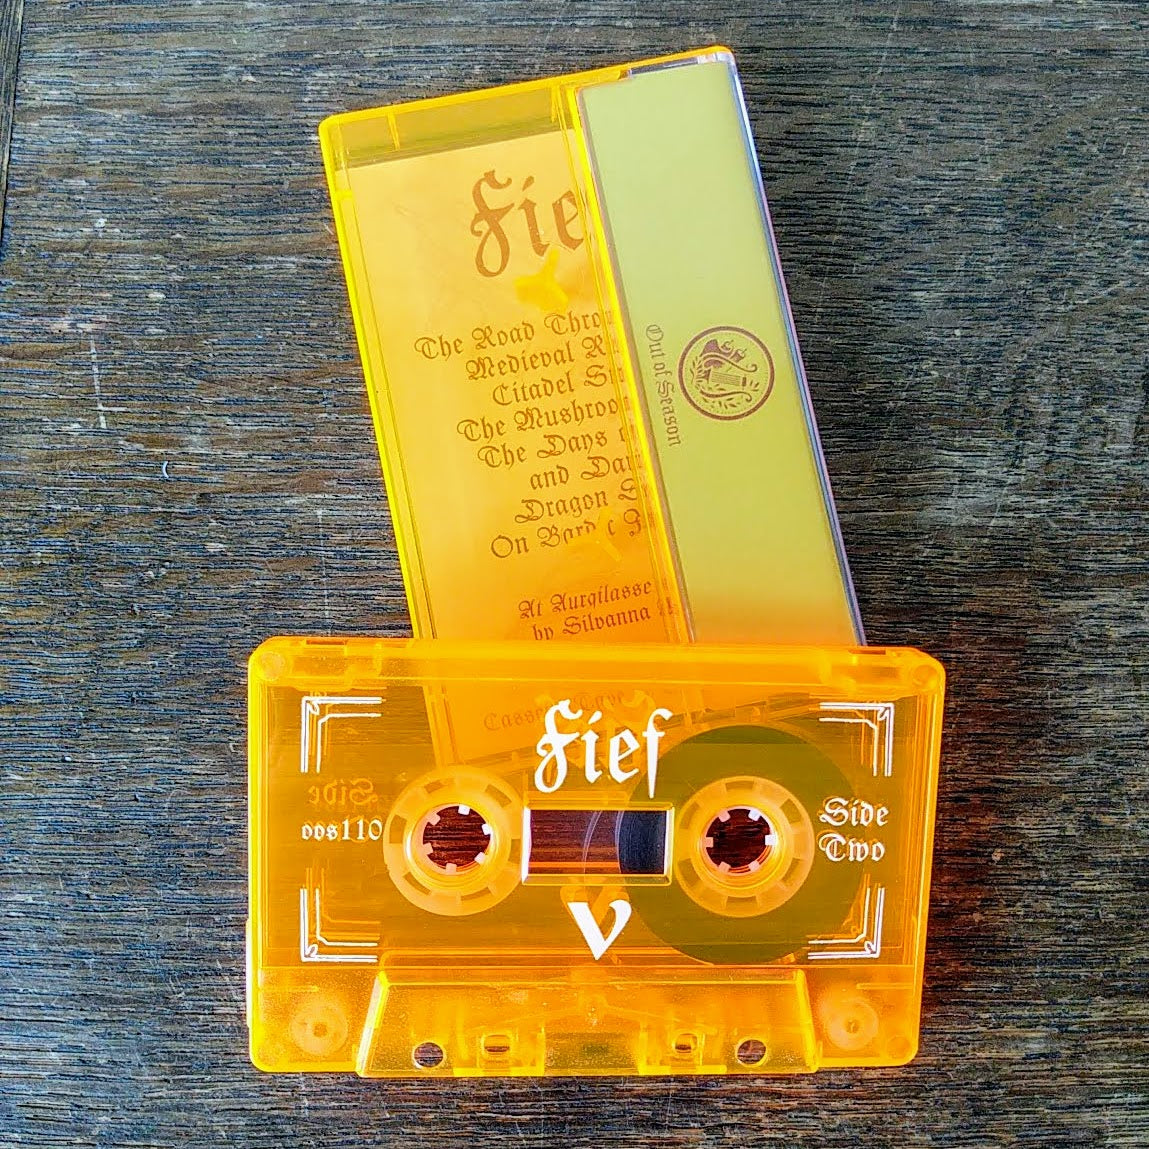 [SOLD OUT] FIEF "V" Cassette Tape (2nd Edition) w/ sticker